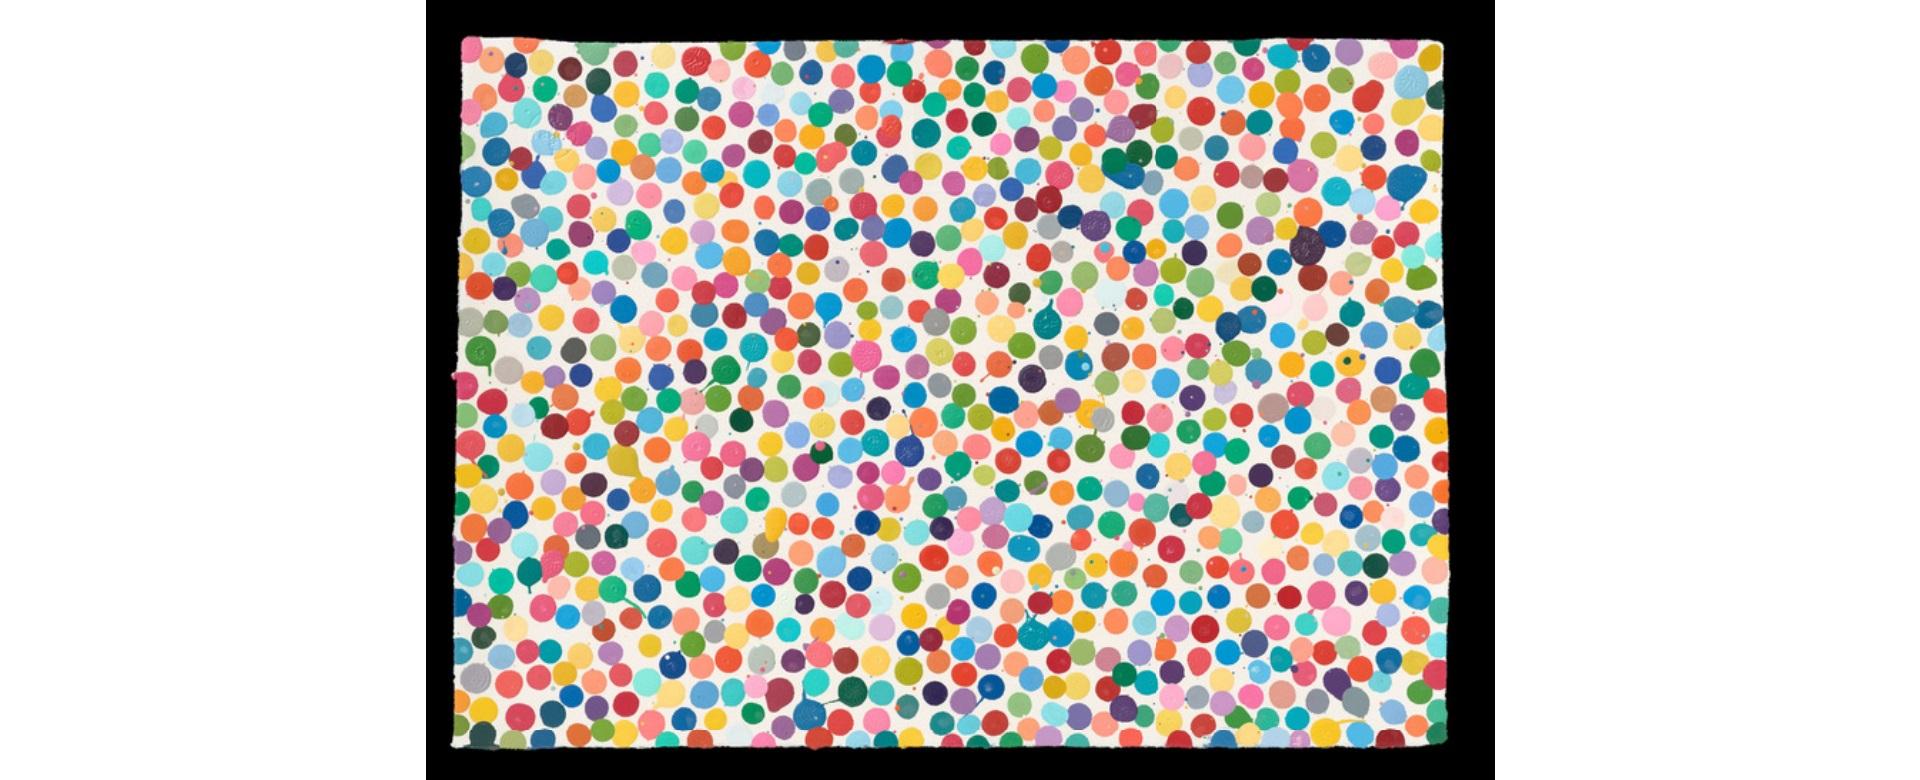 So Call Me Manager (The Currency), Signed, Painting by Damien Hirst, 2021